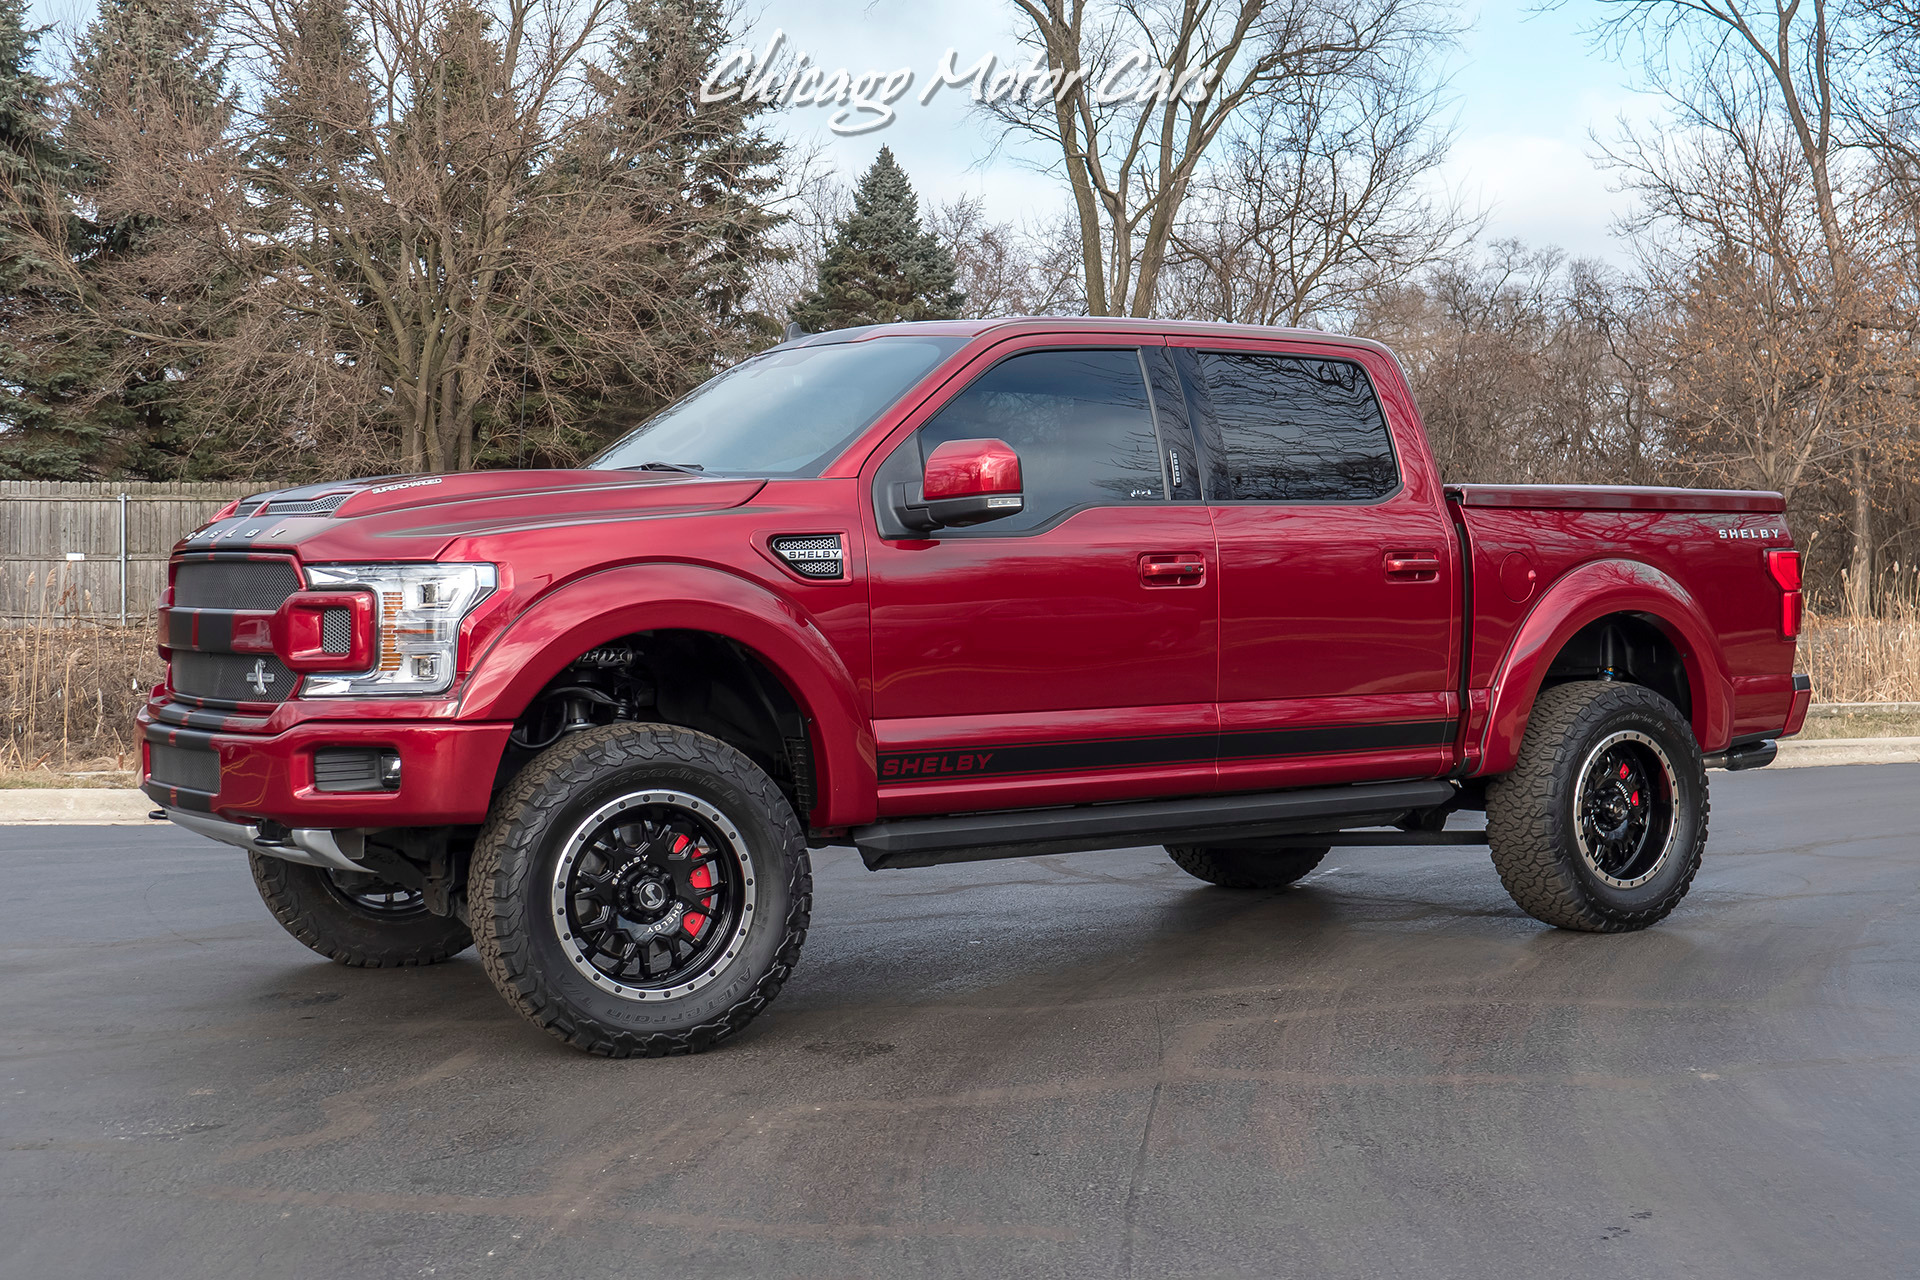 Used 2019 Ford F-150 Lariat 4x4 Shelby Pick-Up Truck MSRP $109k+ LOADED  w/OPTIONS! 755HP Engine! For Sale (Special Pricing) | Chicago Motor Cars  Stock #16657